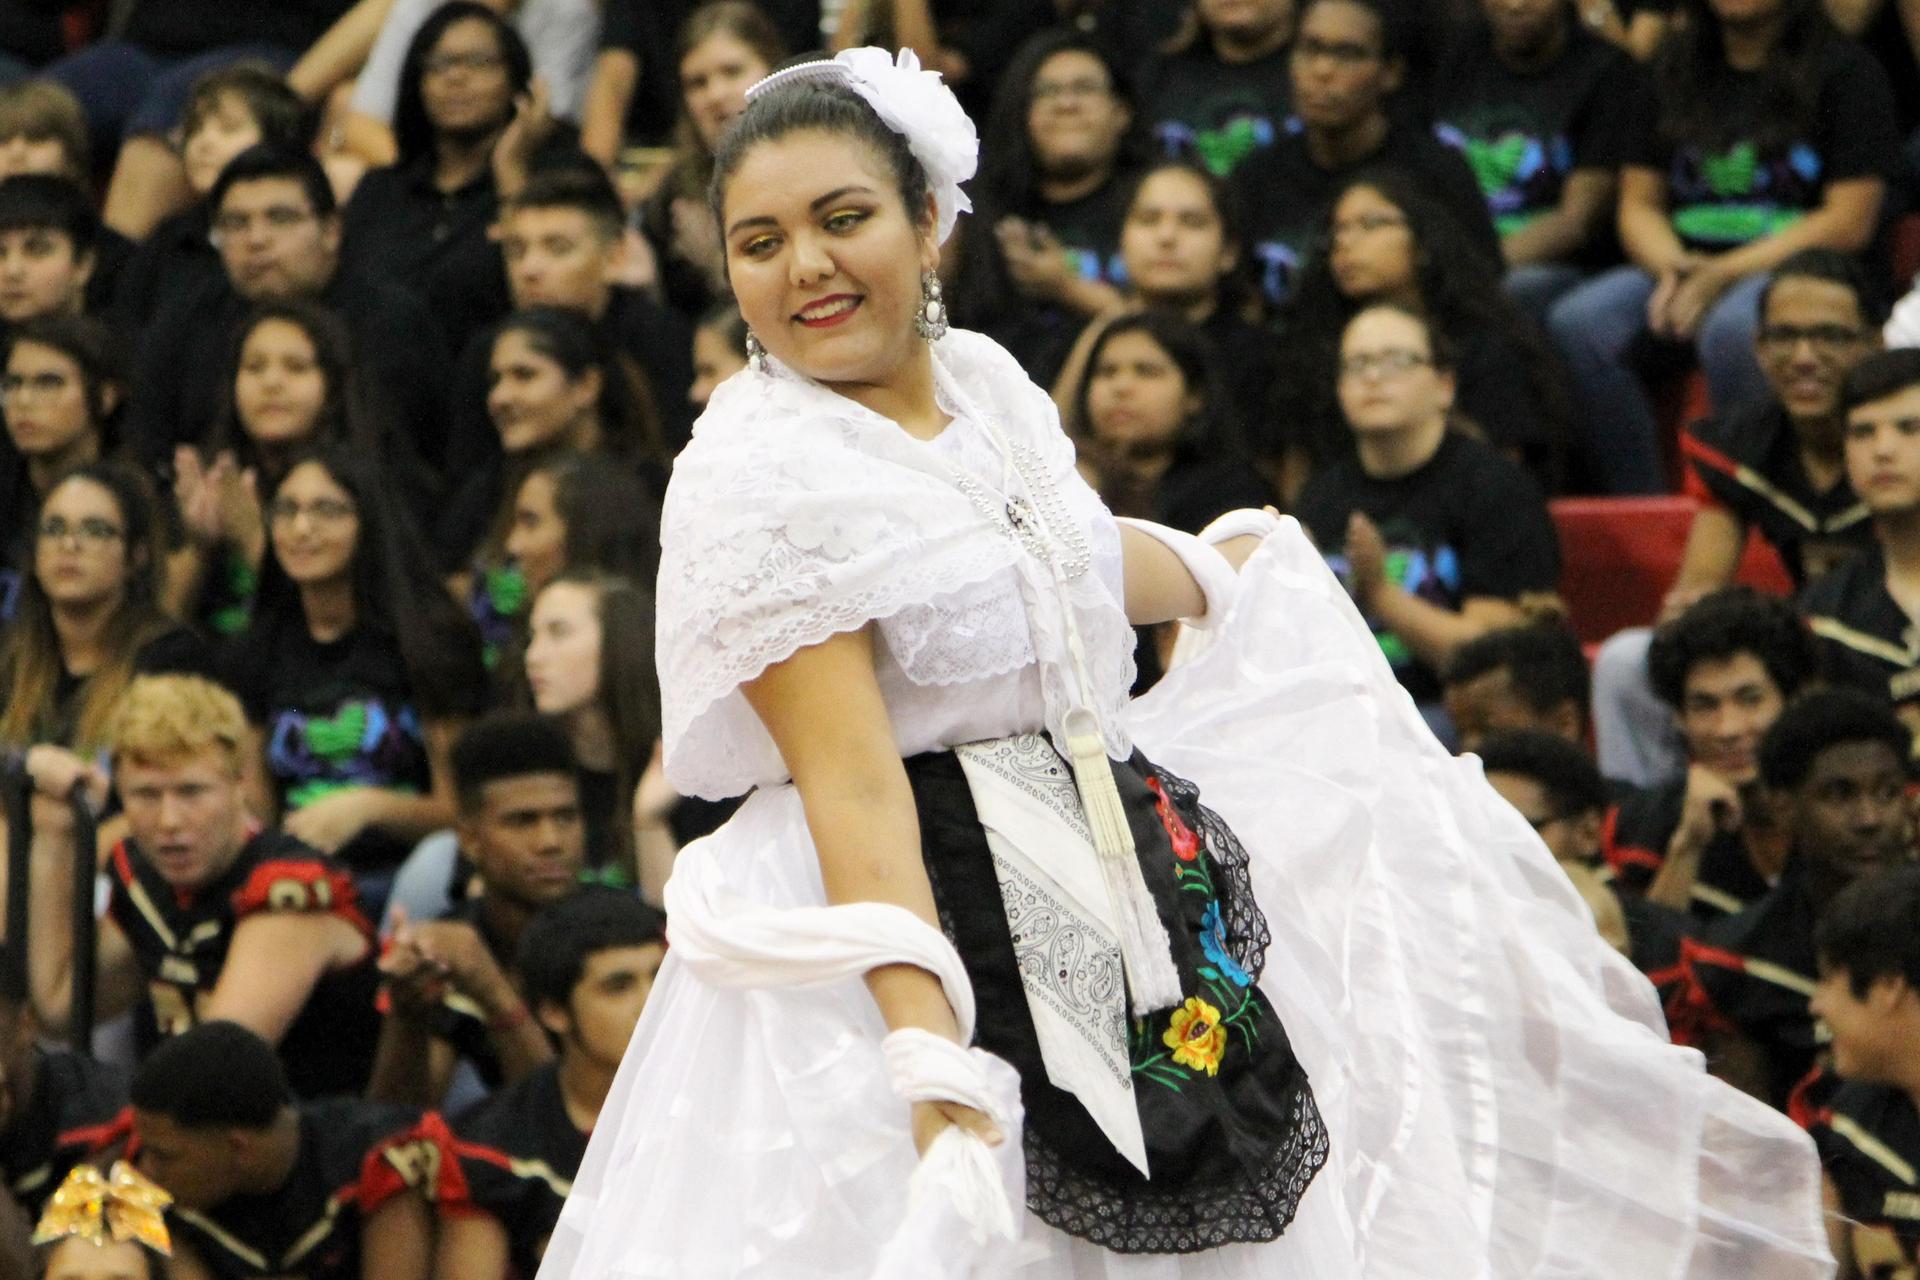 Ballet Folklorico:  Performer Dancing in a white dress.